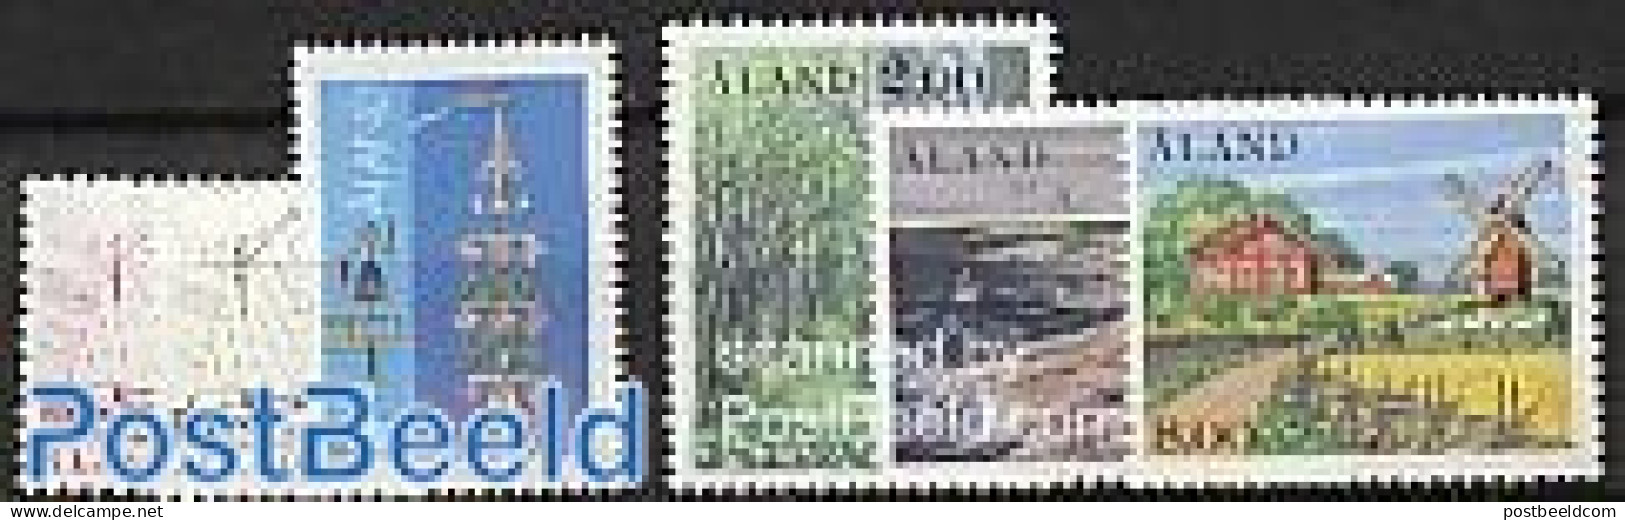 Aland 1985 Yearset 1985 (6v), Mint NH, Various - Yearsets (by Country) - Unclassified